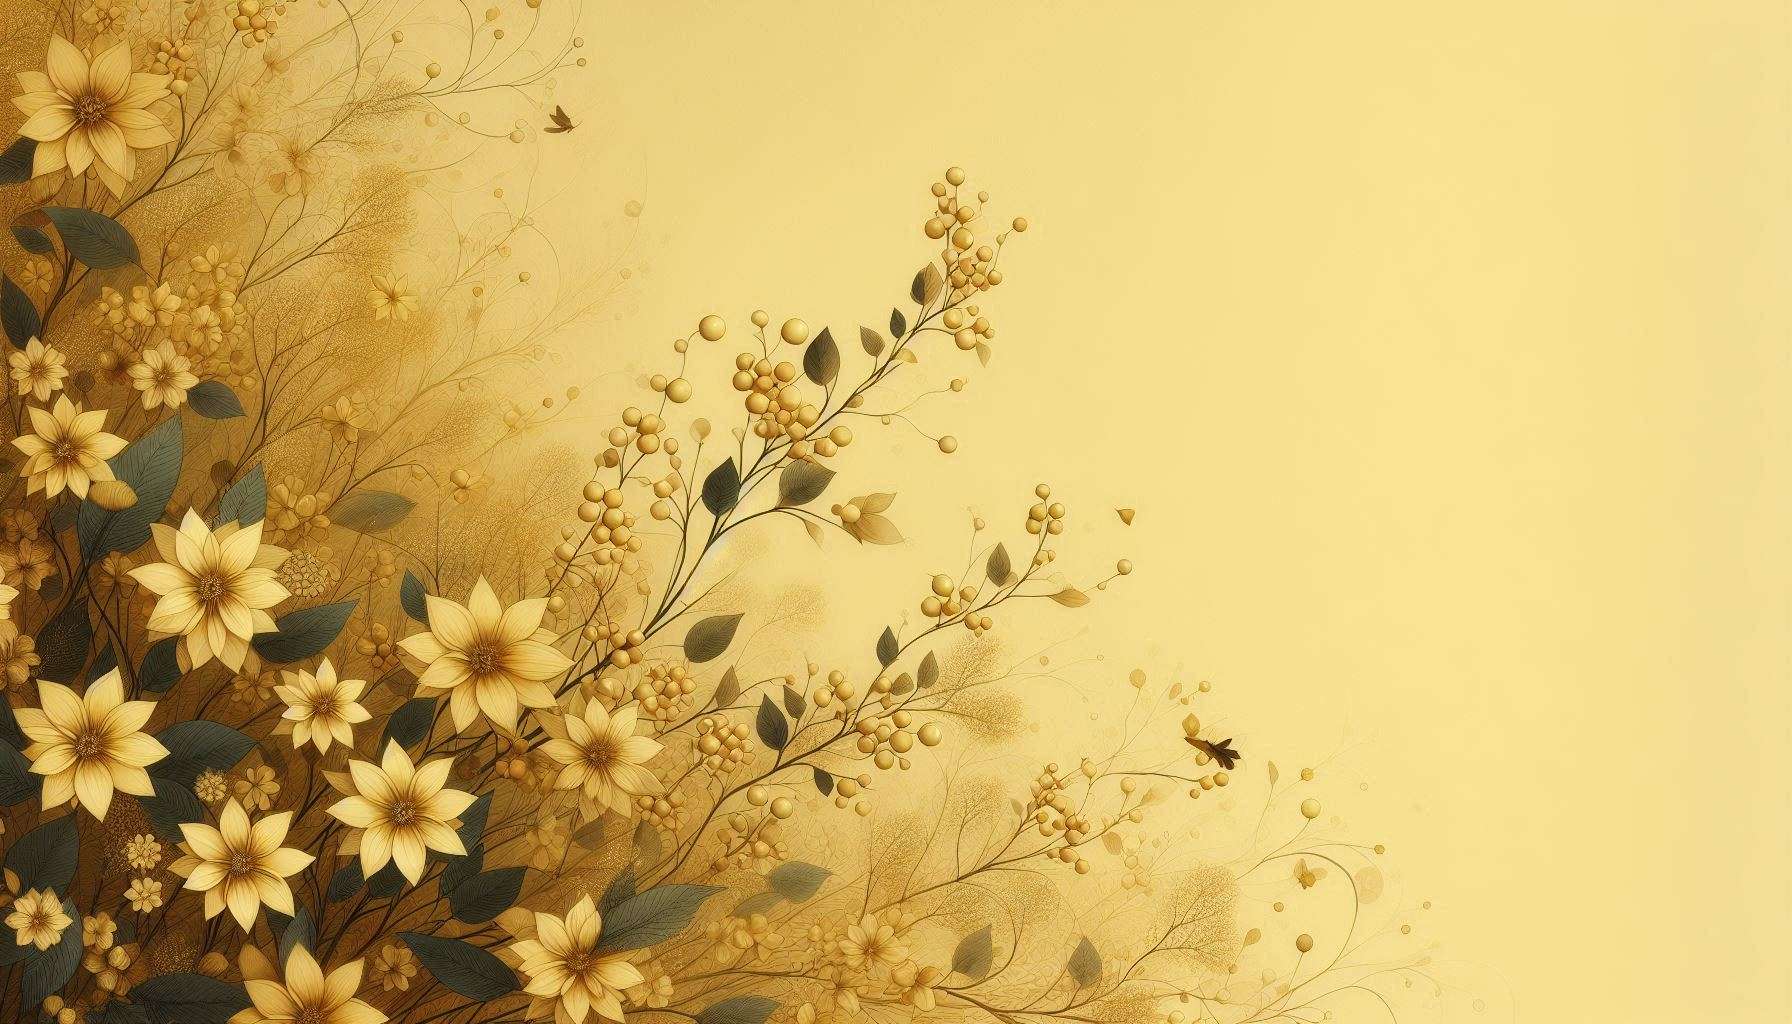 Download Free elegant light yellow background with flower for websites, slideshows, and designs | royalty-free and unlimited use.